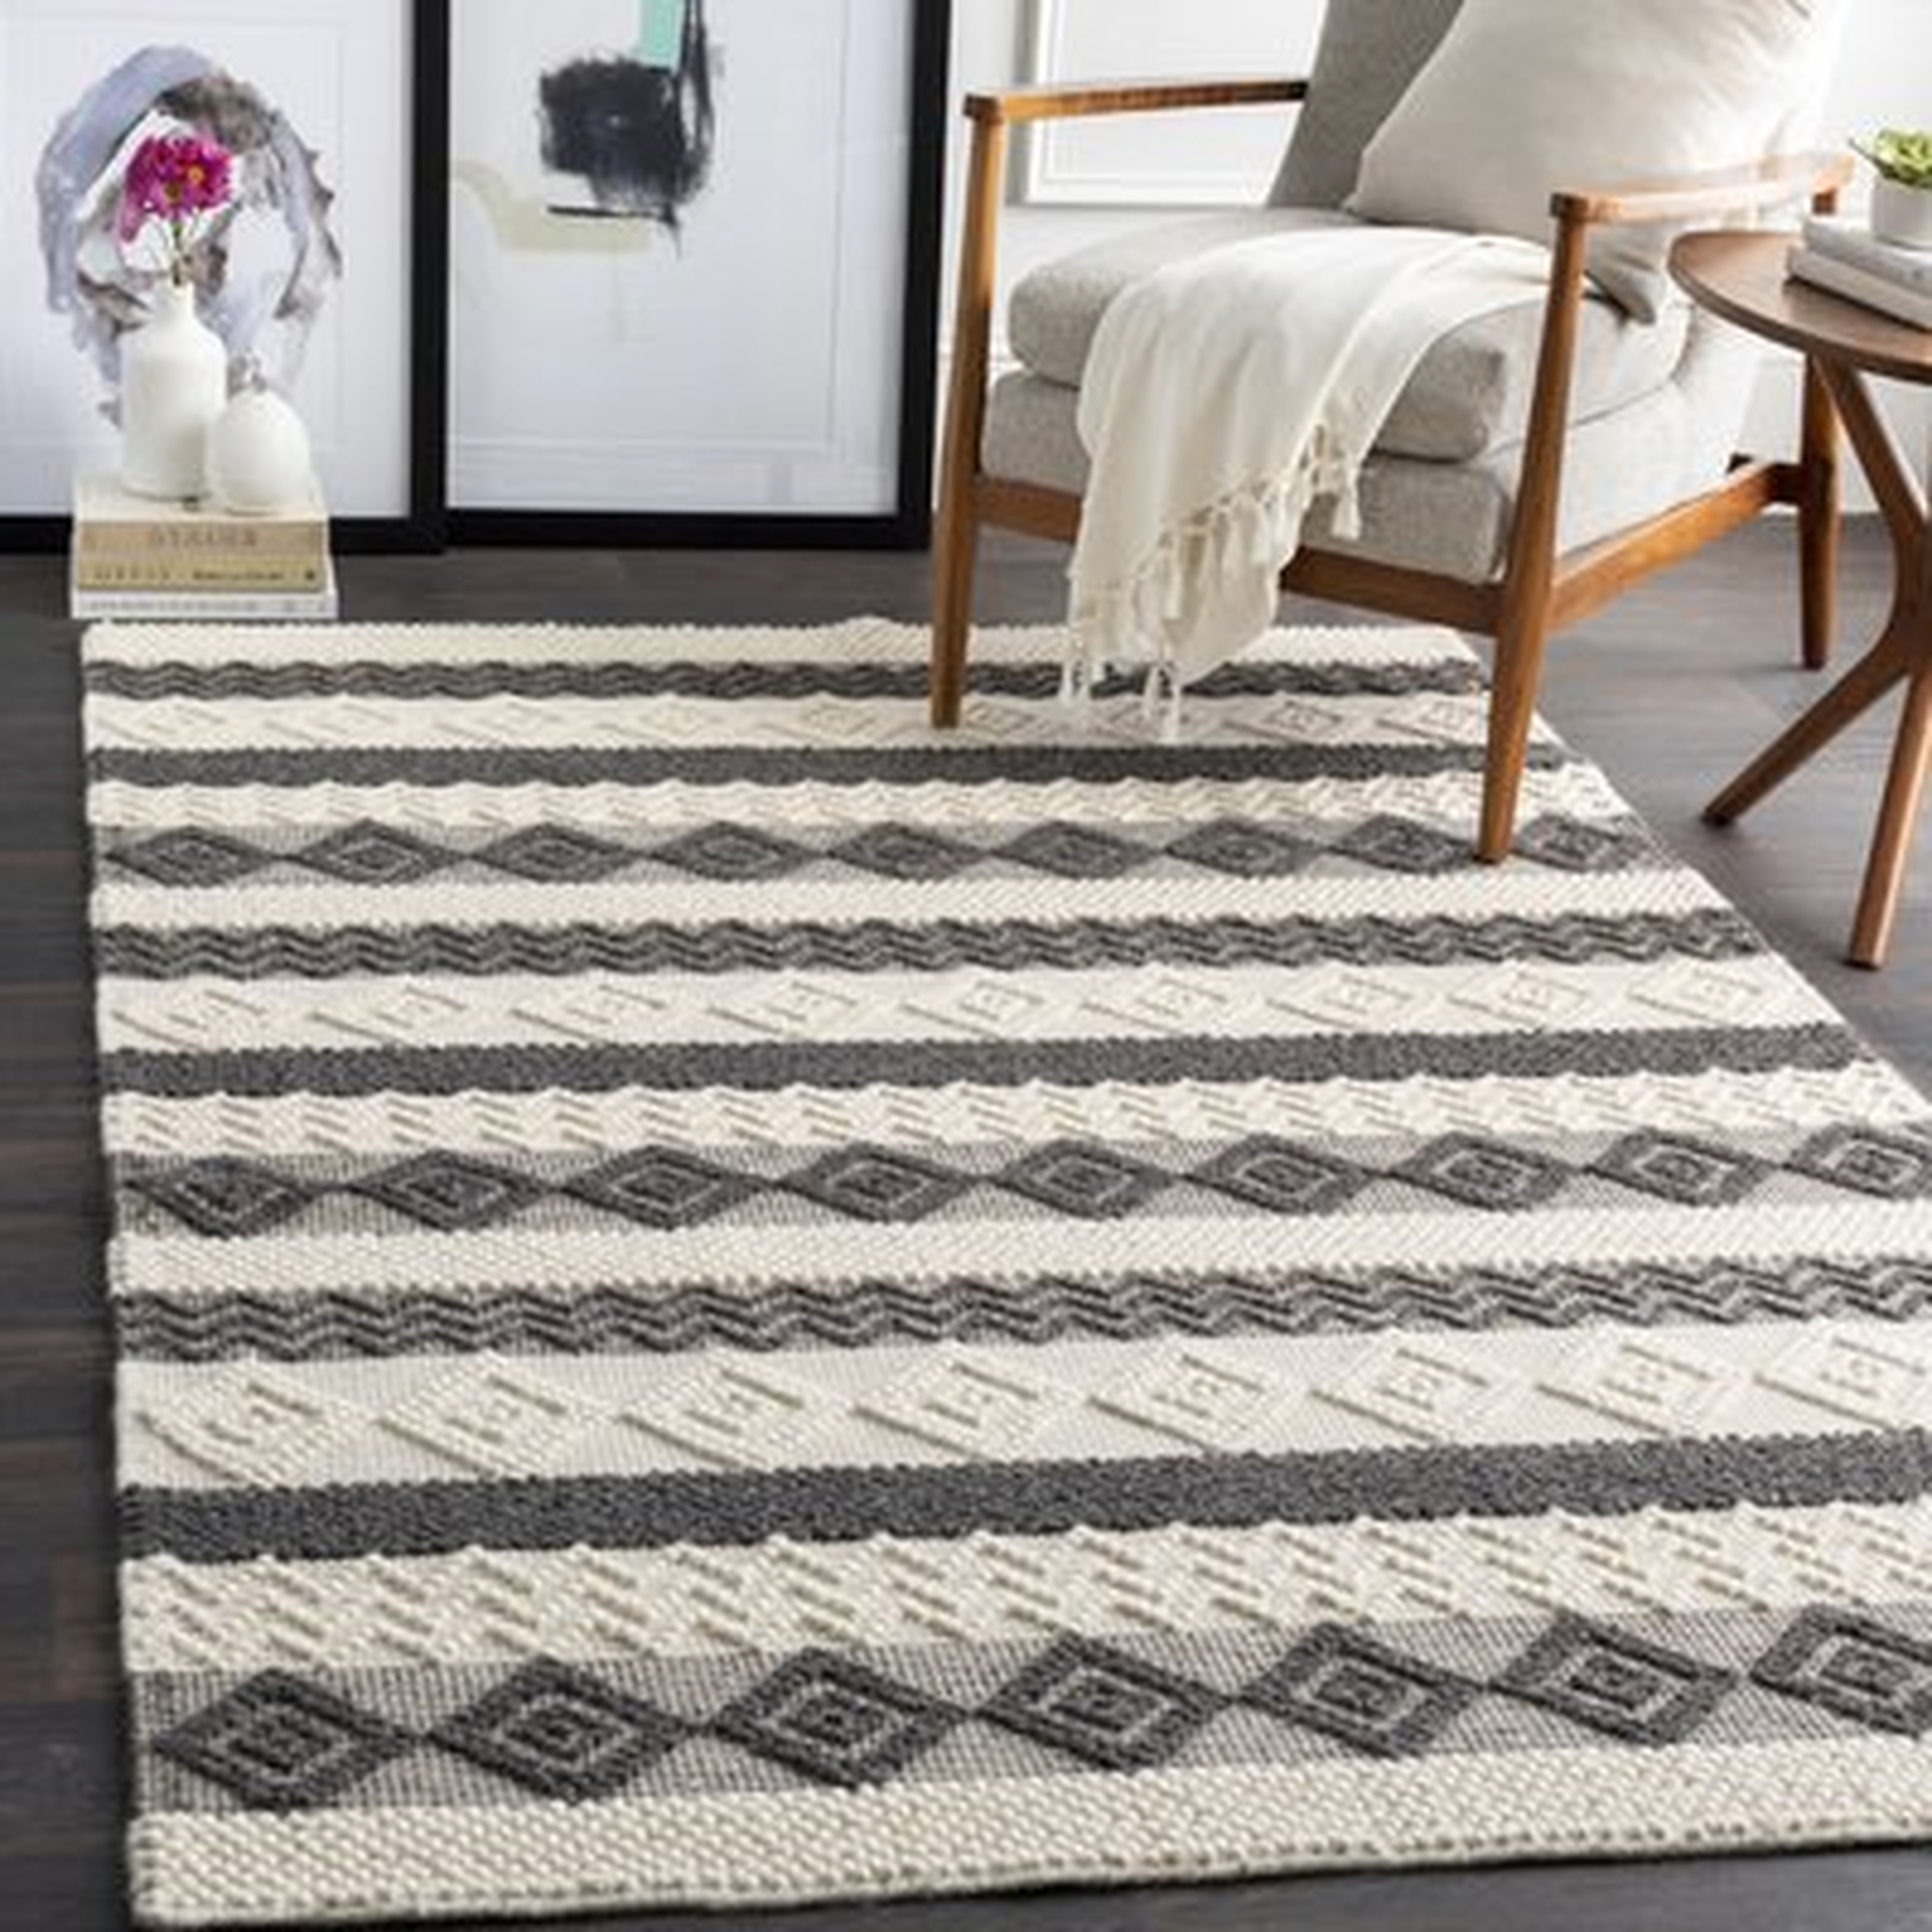 Clancy Global-Inspired Hand-Knotted Wool/Cotton Beige/Charcoal Area Rug - Wayfair